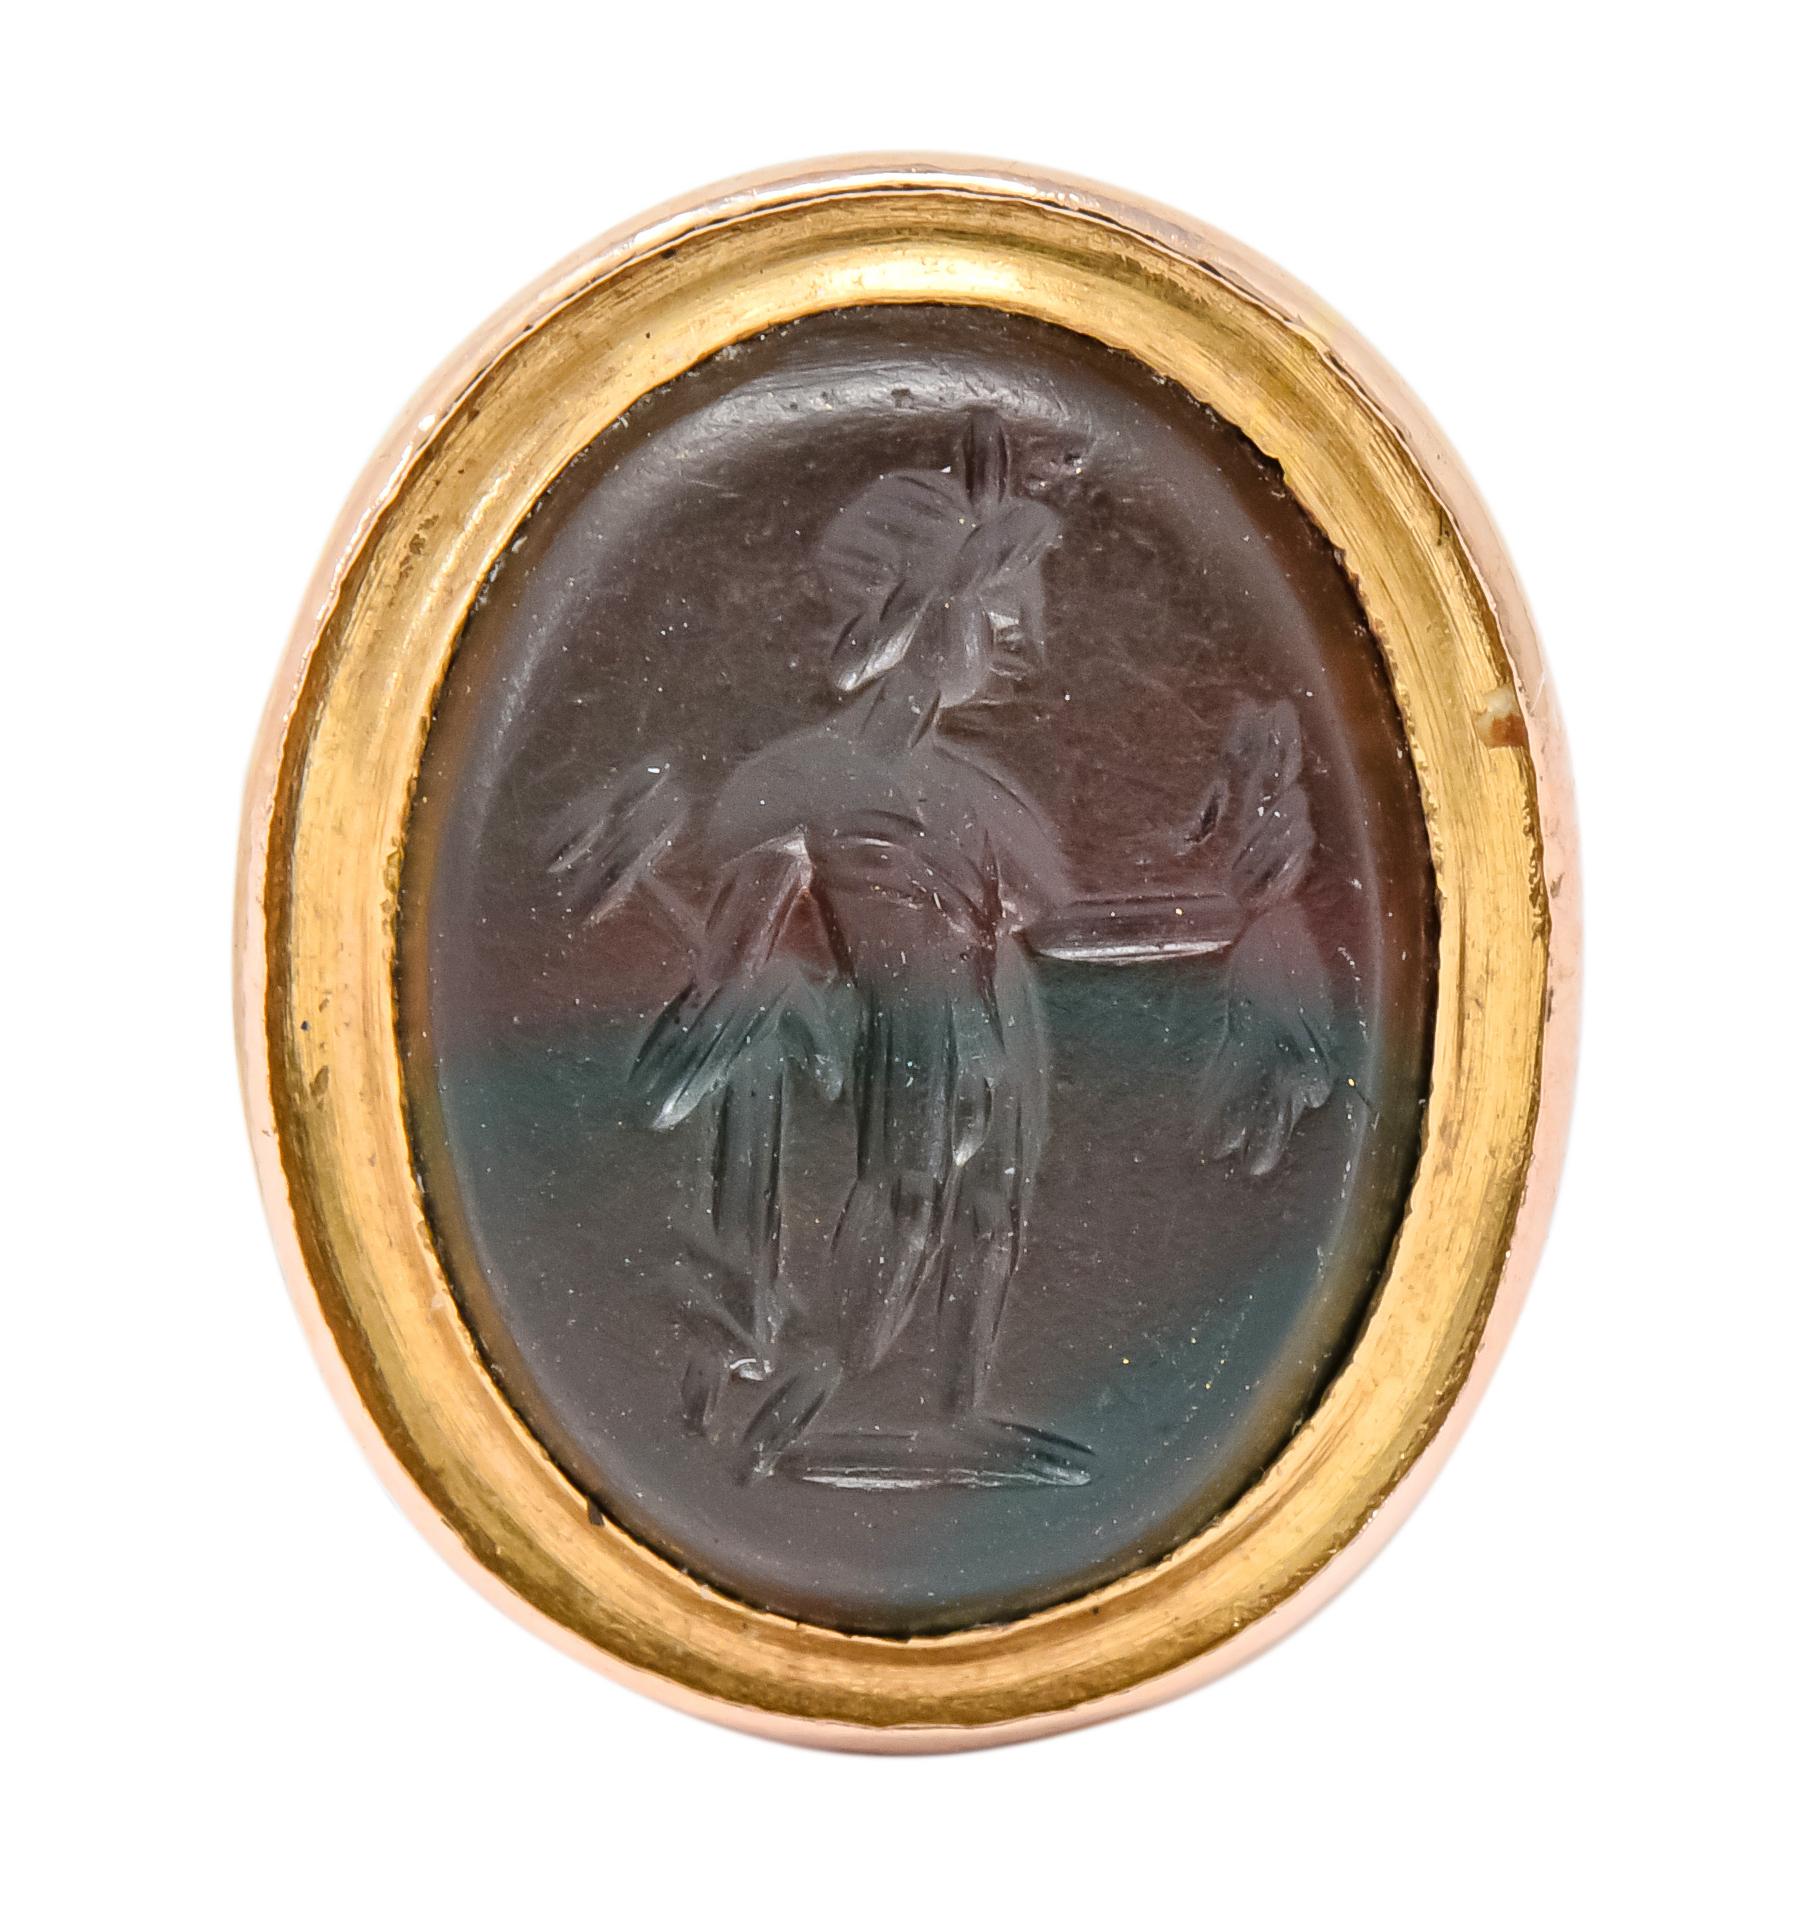 Featuring a hardstone intaglio seal depicting a standing figure with sash and articles held in hand 

Bezel set within a coiled serpentine 14 karat gold fob pendant that displays a textured scale motif

Circa 1870 

Tested as 14 karat